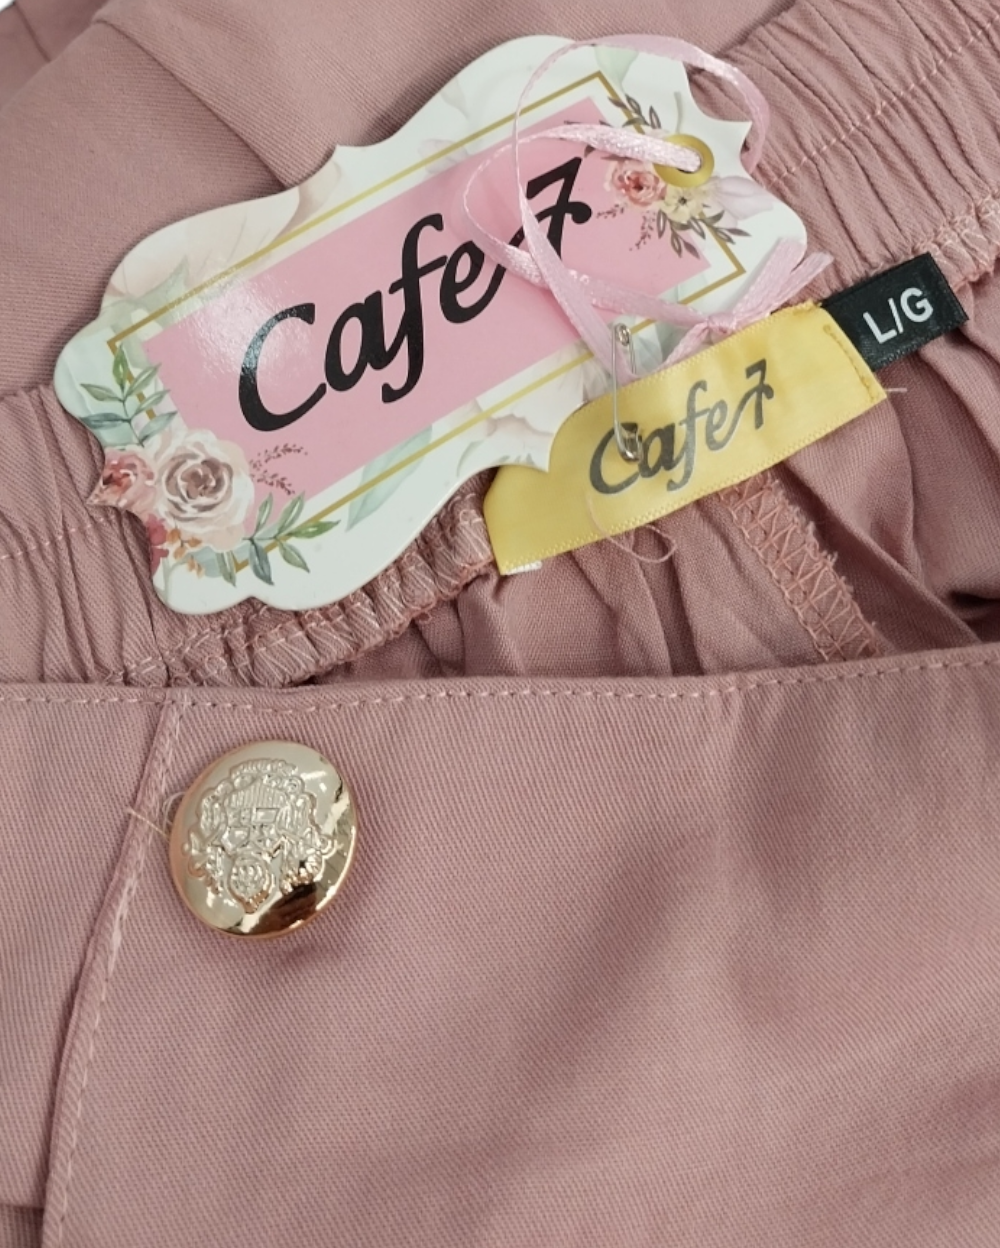 Shorts Casuales Cafe7